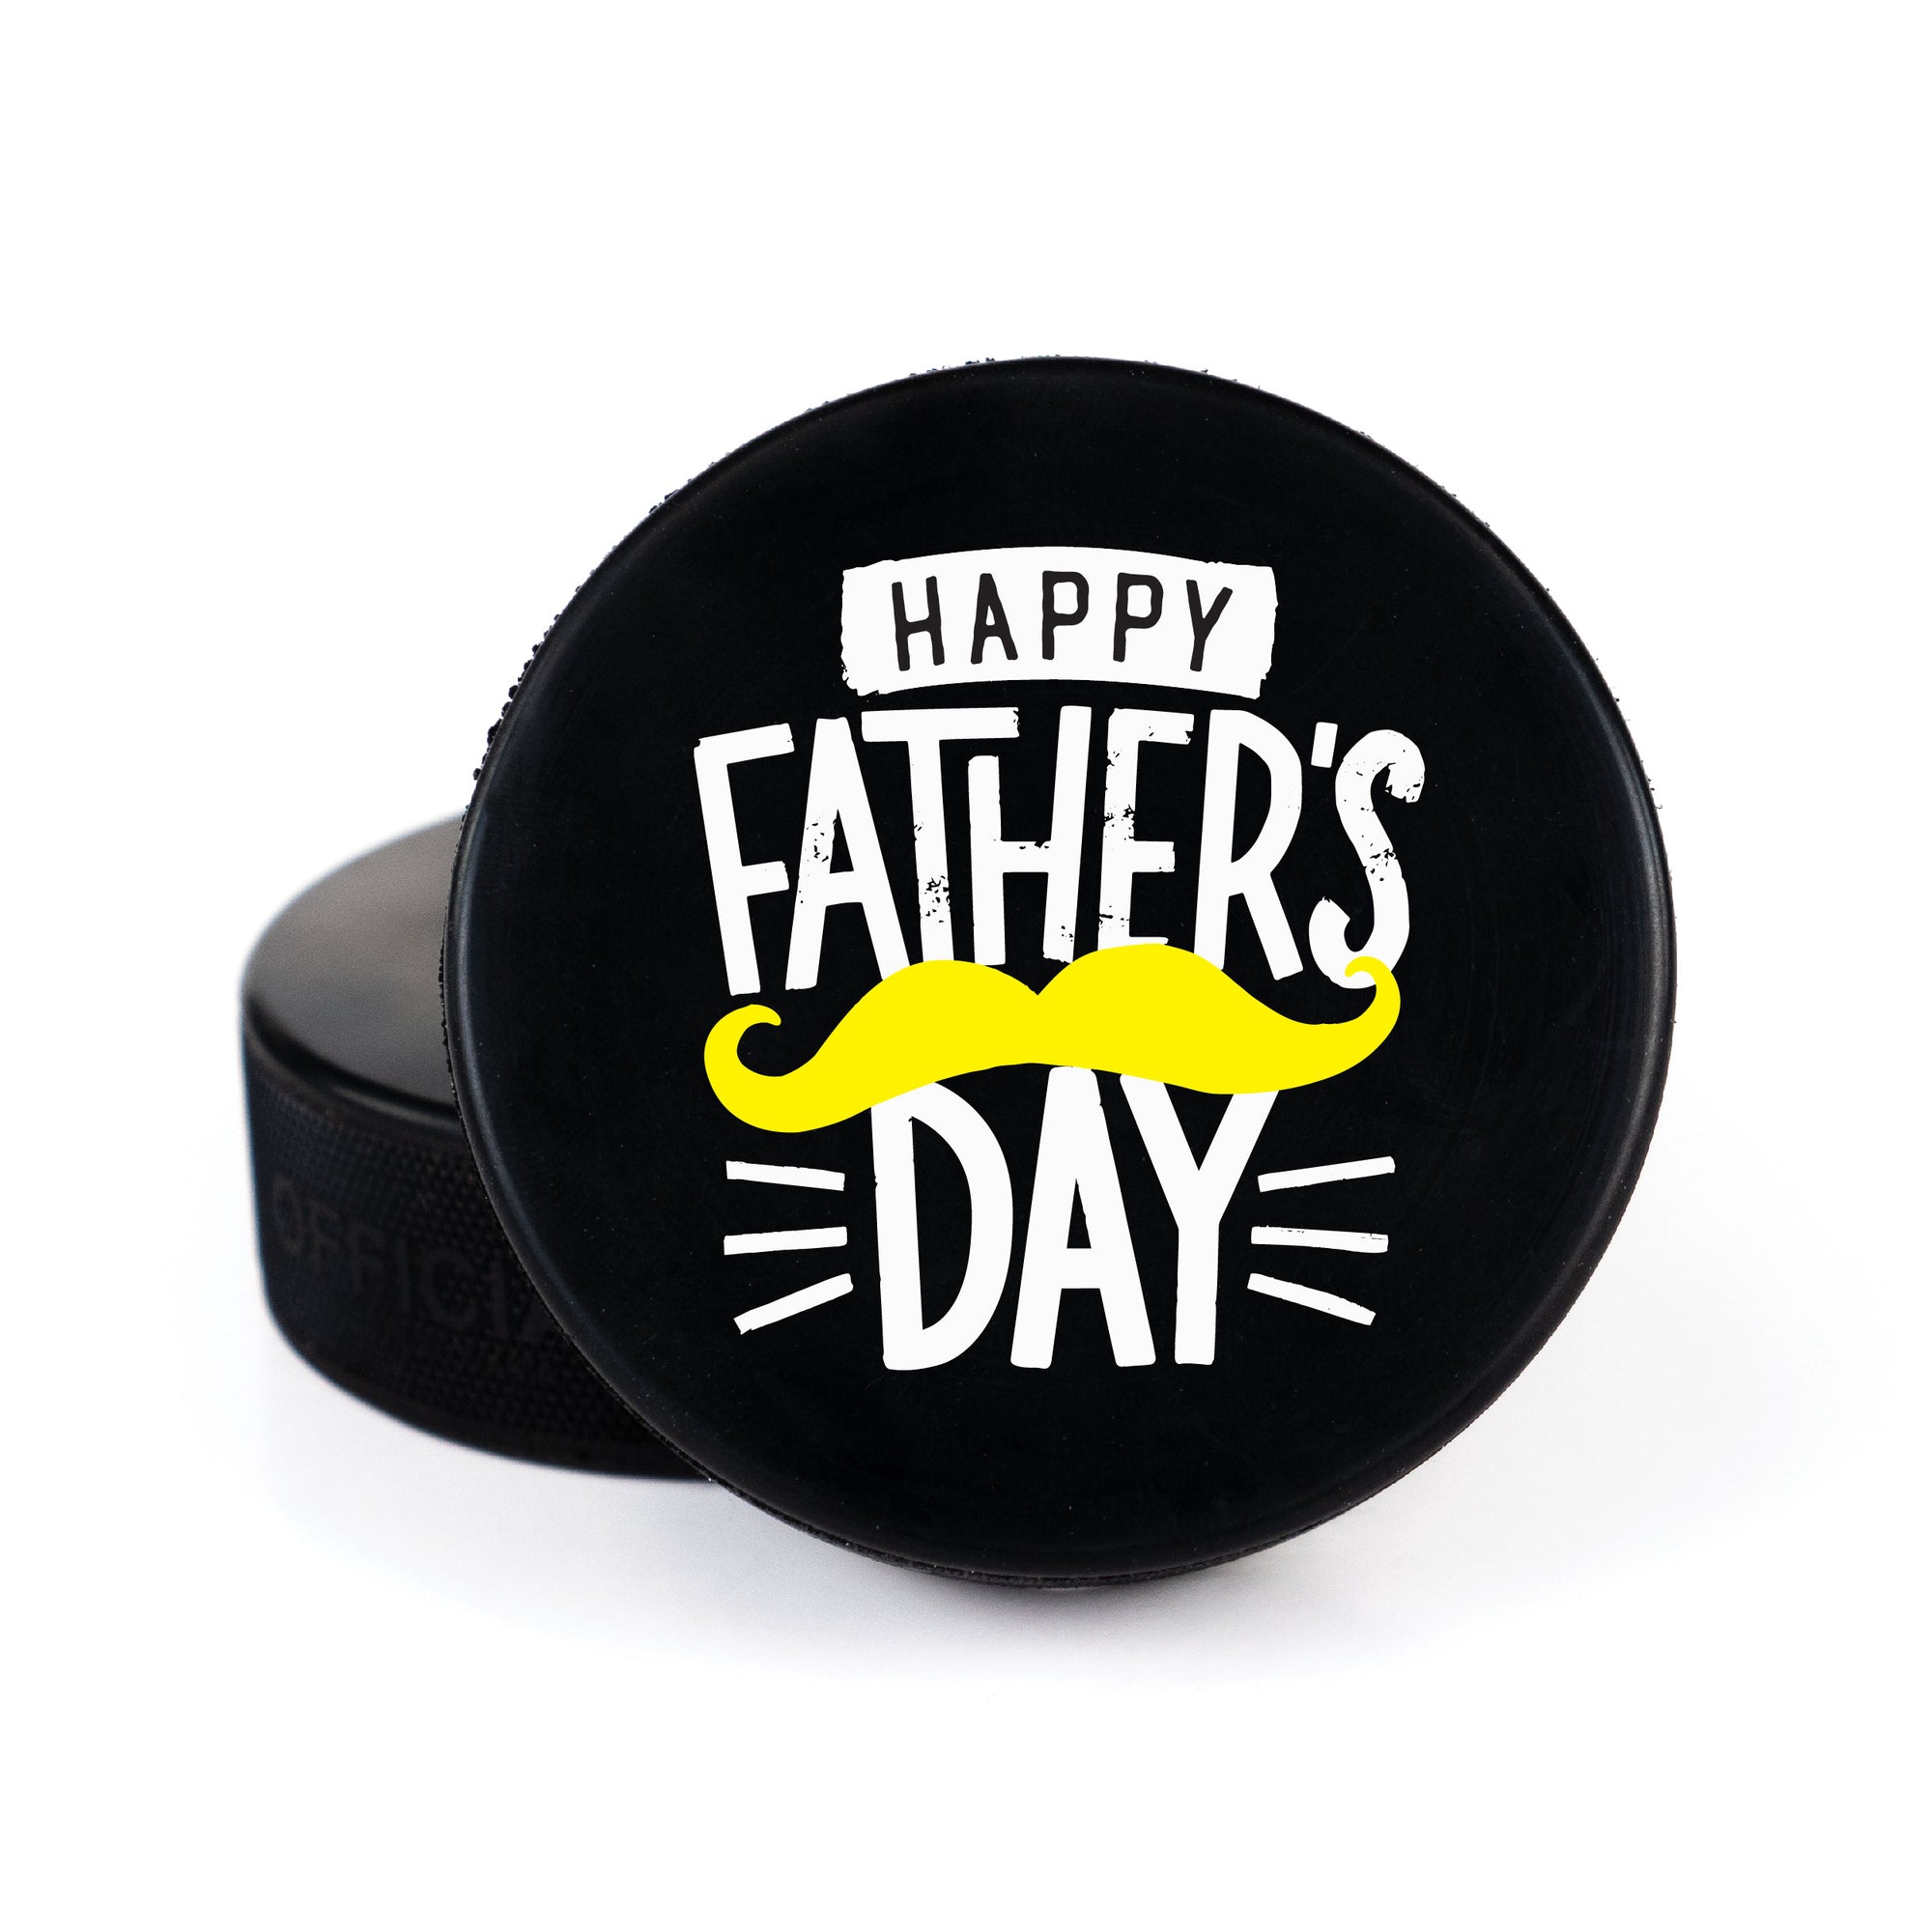 Printed Puck with Happy Father's Day Design